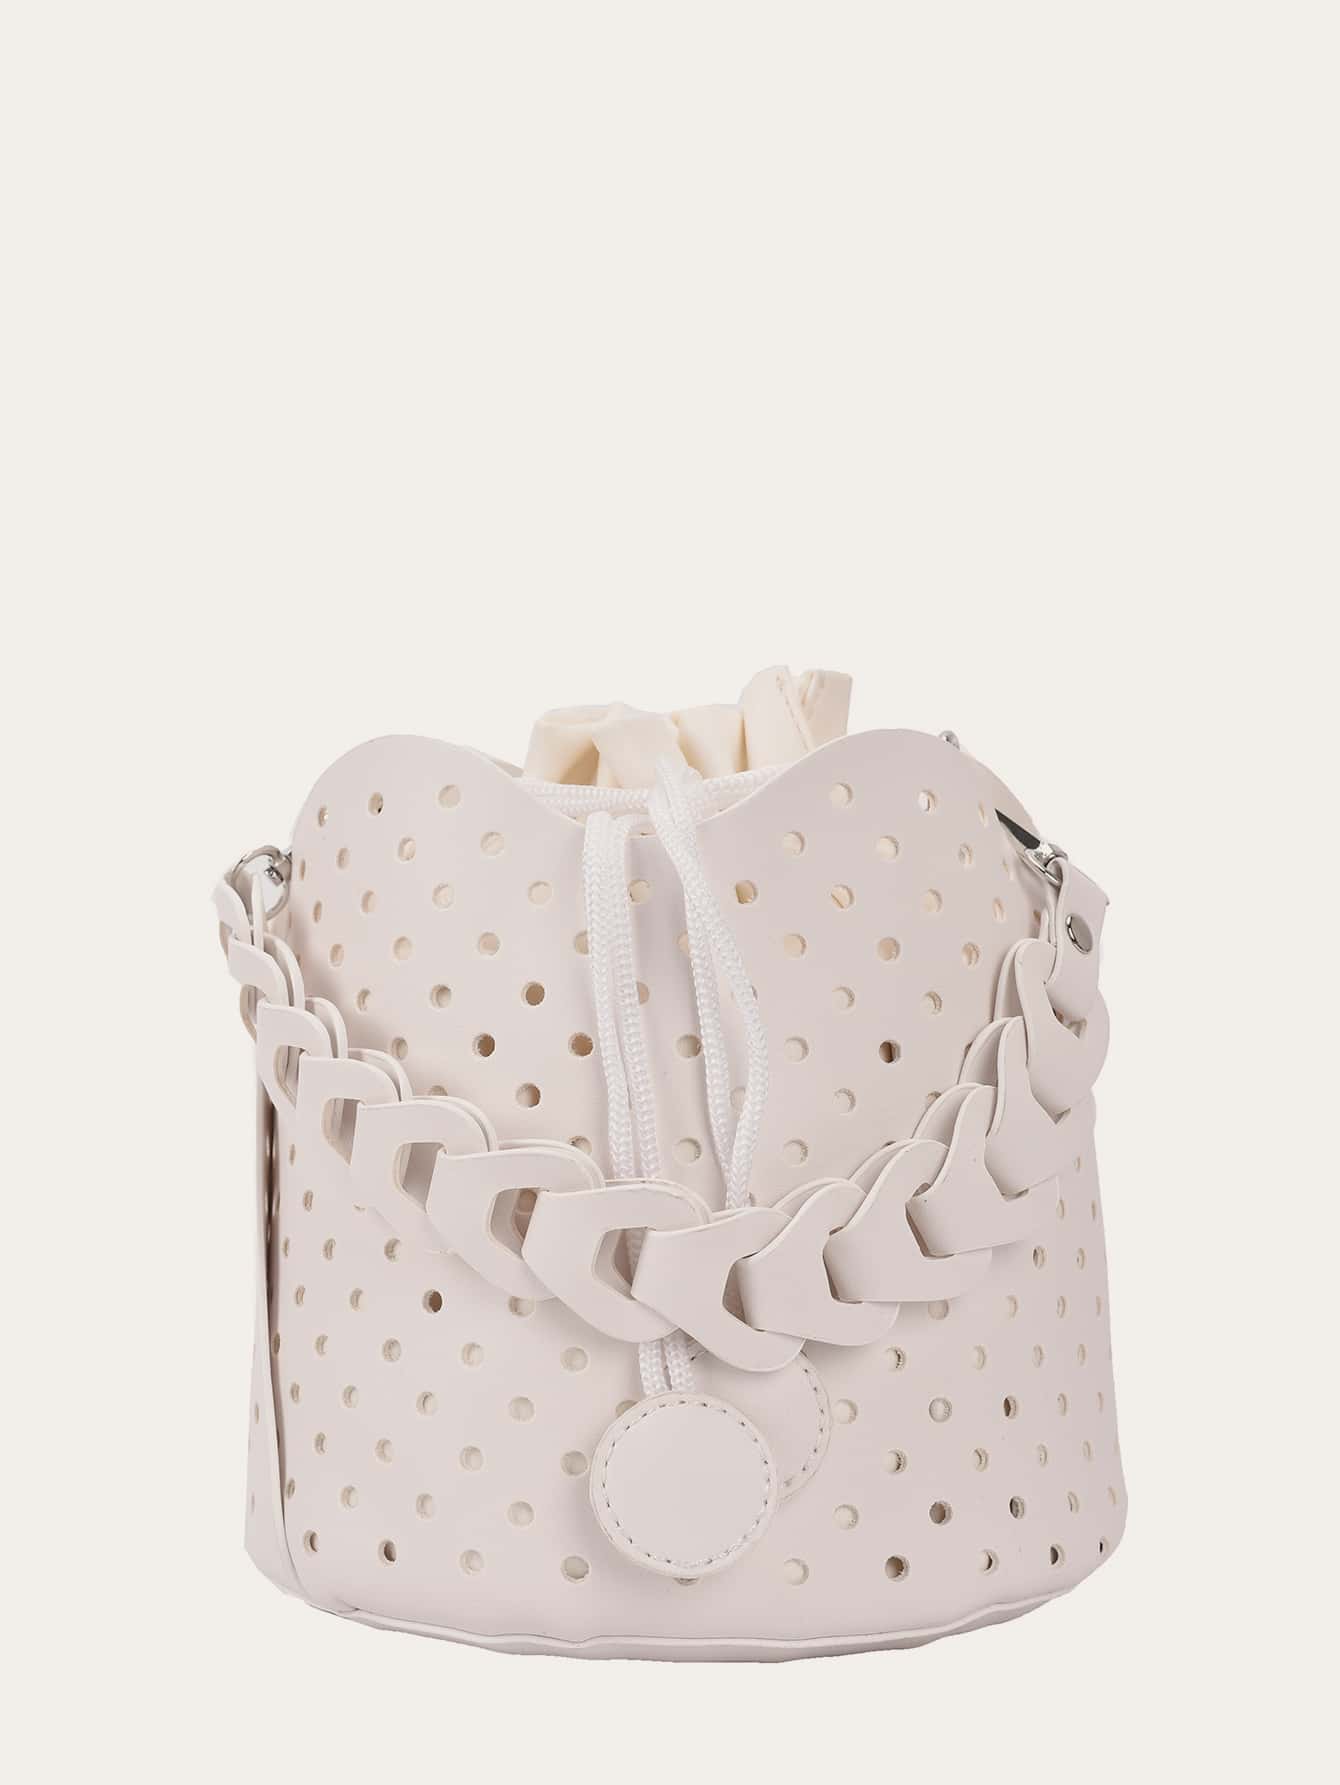 Hollow Out Bucket Bag